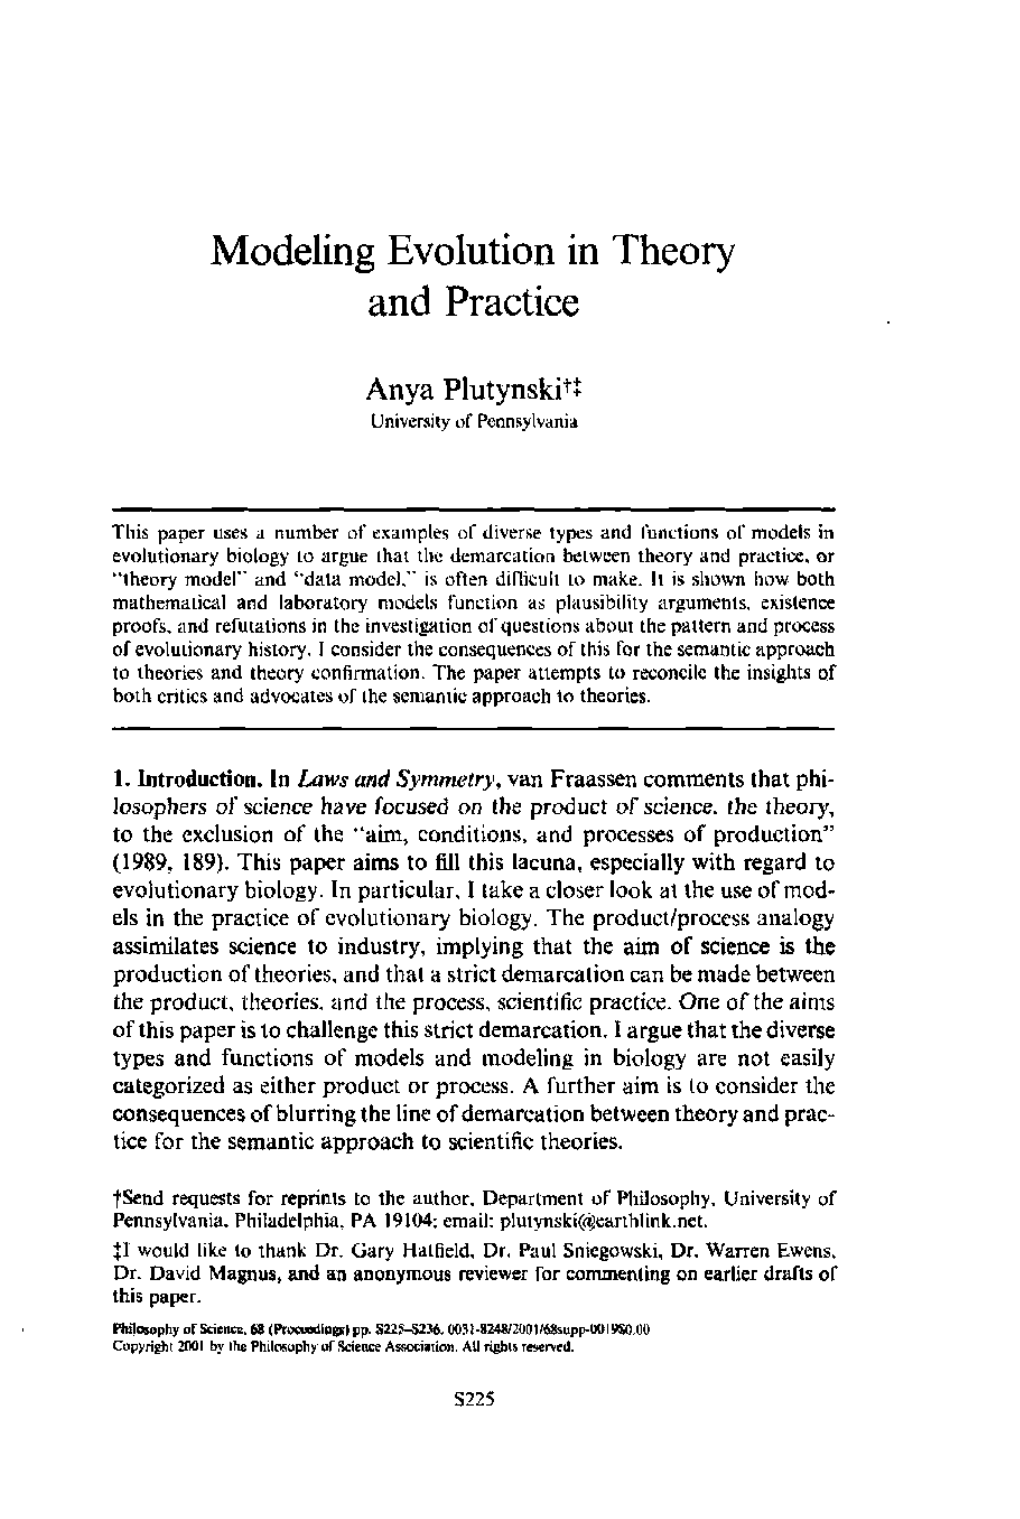 Modeling Evolution in Theory and Practice